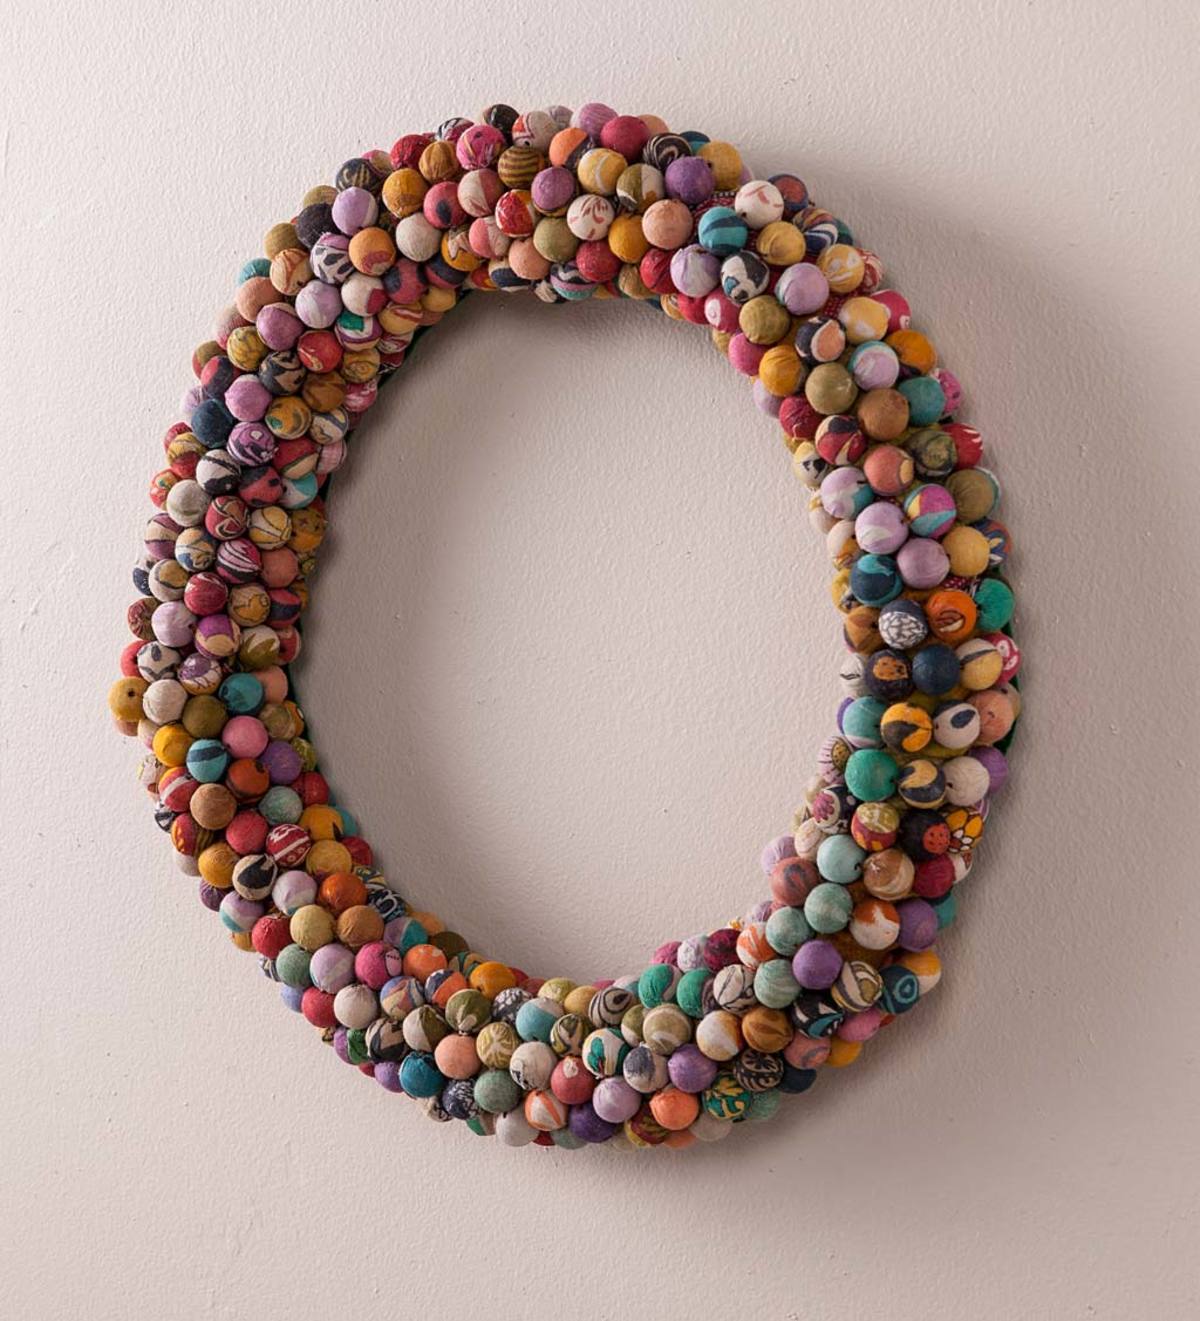 Recycled Kantha Decorative Wreath